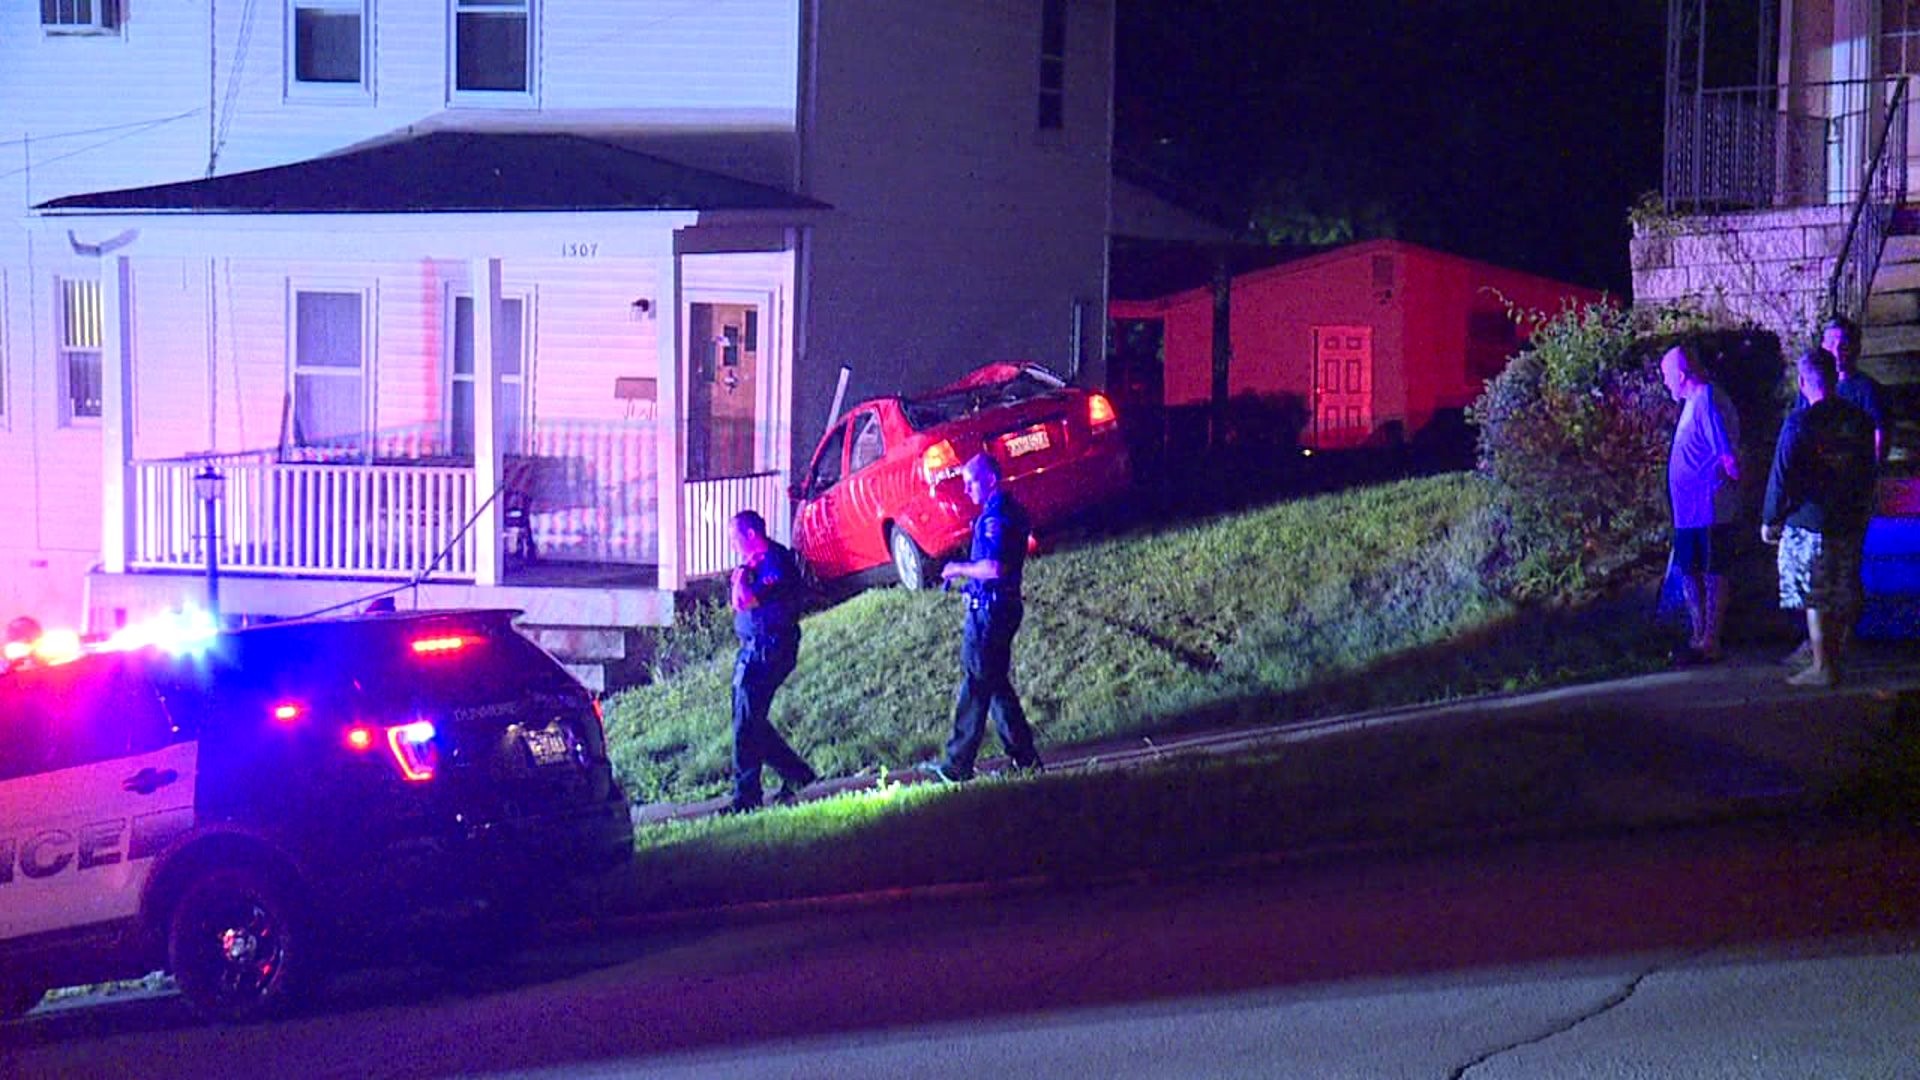 Driver Falls Asleep, Crashes Into Home in Dunmore